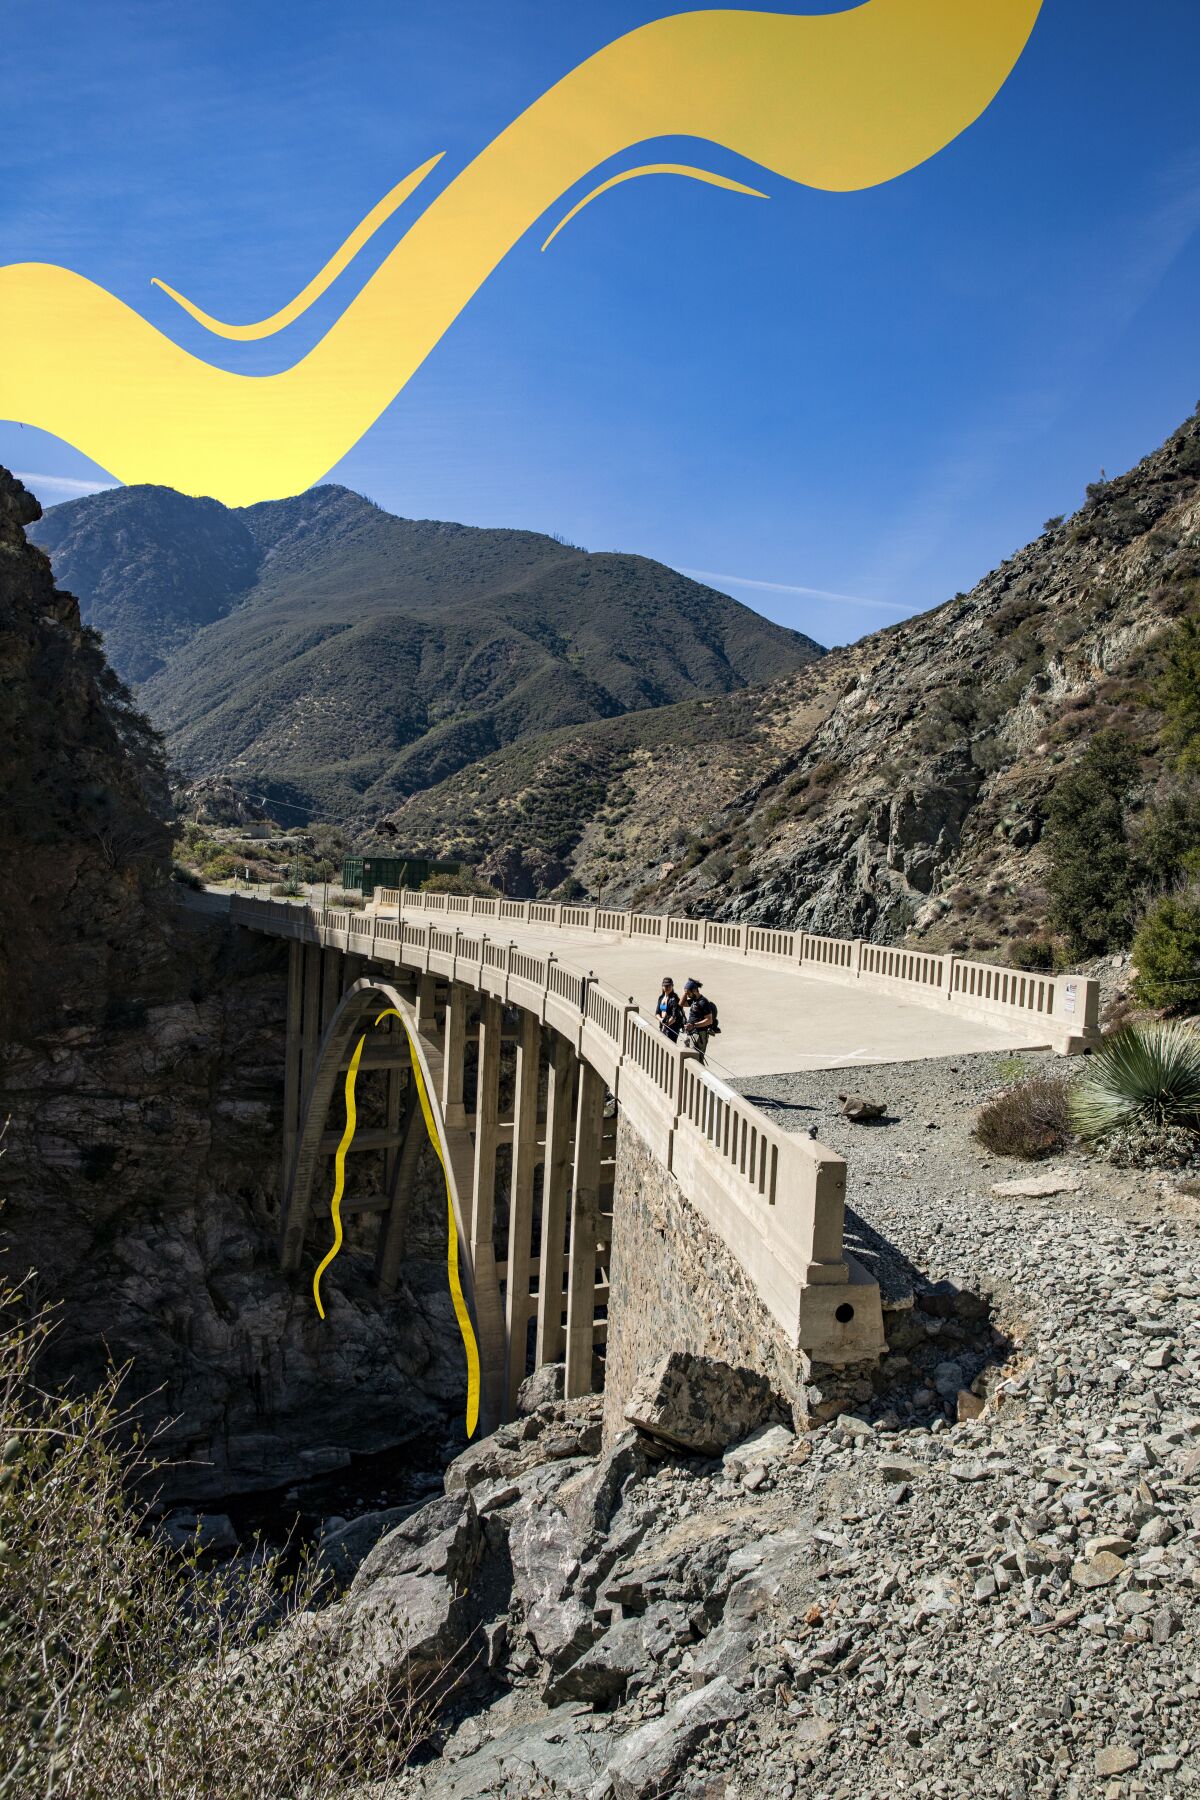 Hikers take in the San Gabriel River canyon view on the Bridge to Nowhere.